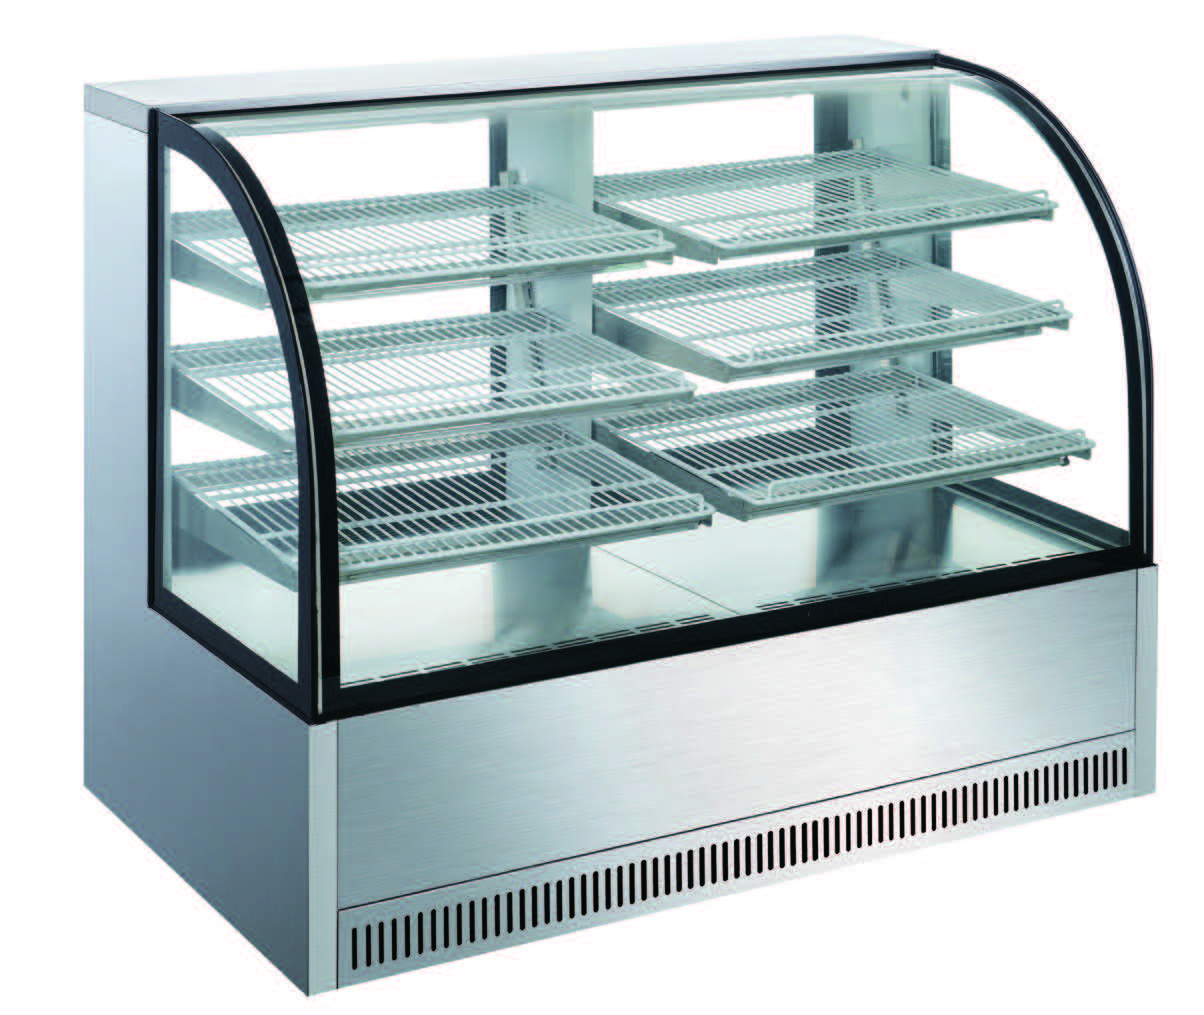 59" Refrigerated Display Case